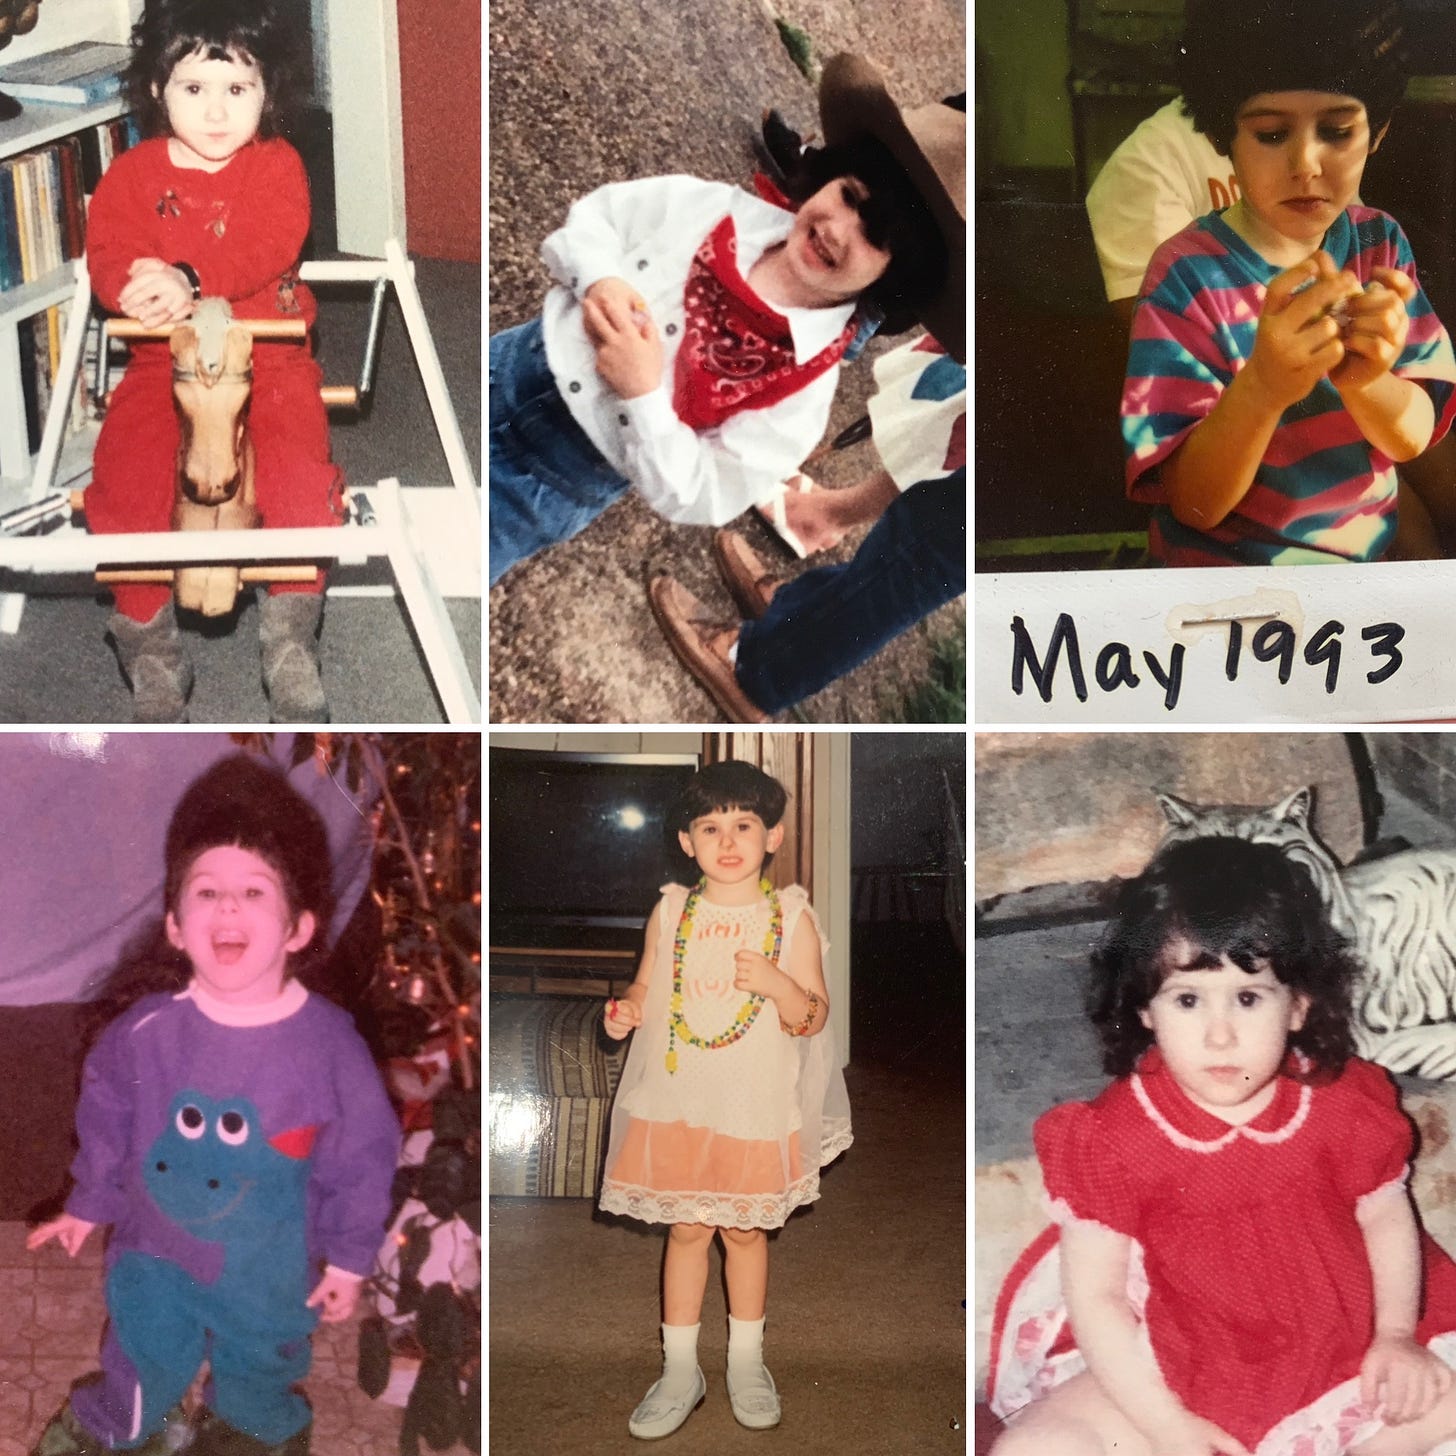 6 photos of me as a child. First, me in red on a rocking horse, hands clasped in front of me. Second me dressed up for western day, hands clasped in front of me, third me in May 1993, favorite teal and pink shirt and hands clasped in front of me. Bottom row, first me in my dinosaur onesie, growling at the camera enthusiastically, second, me in a dress, with an uncomfortable look on my face, third me in a red dress, staring blankly at the camrea.